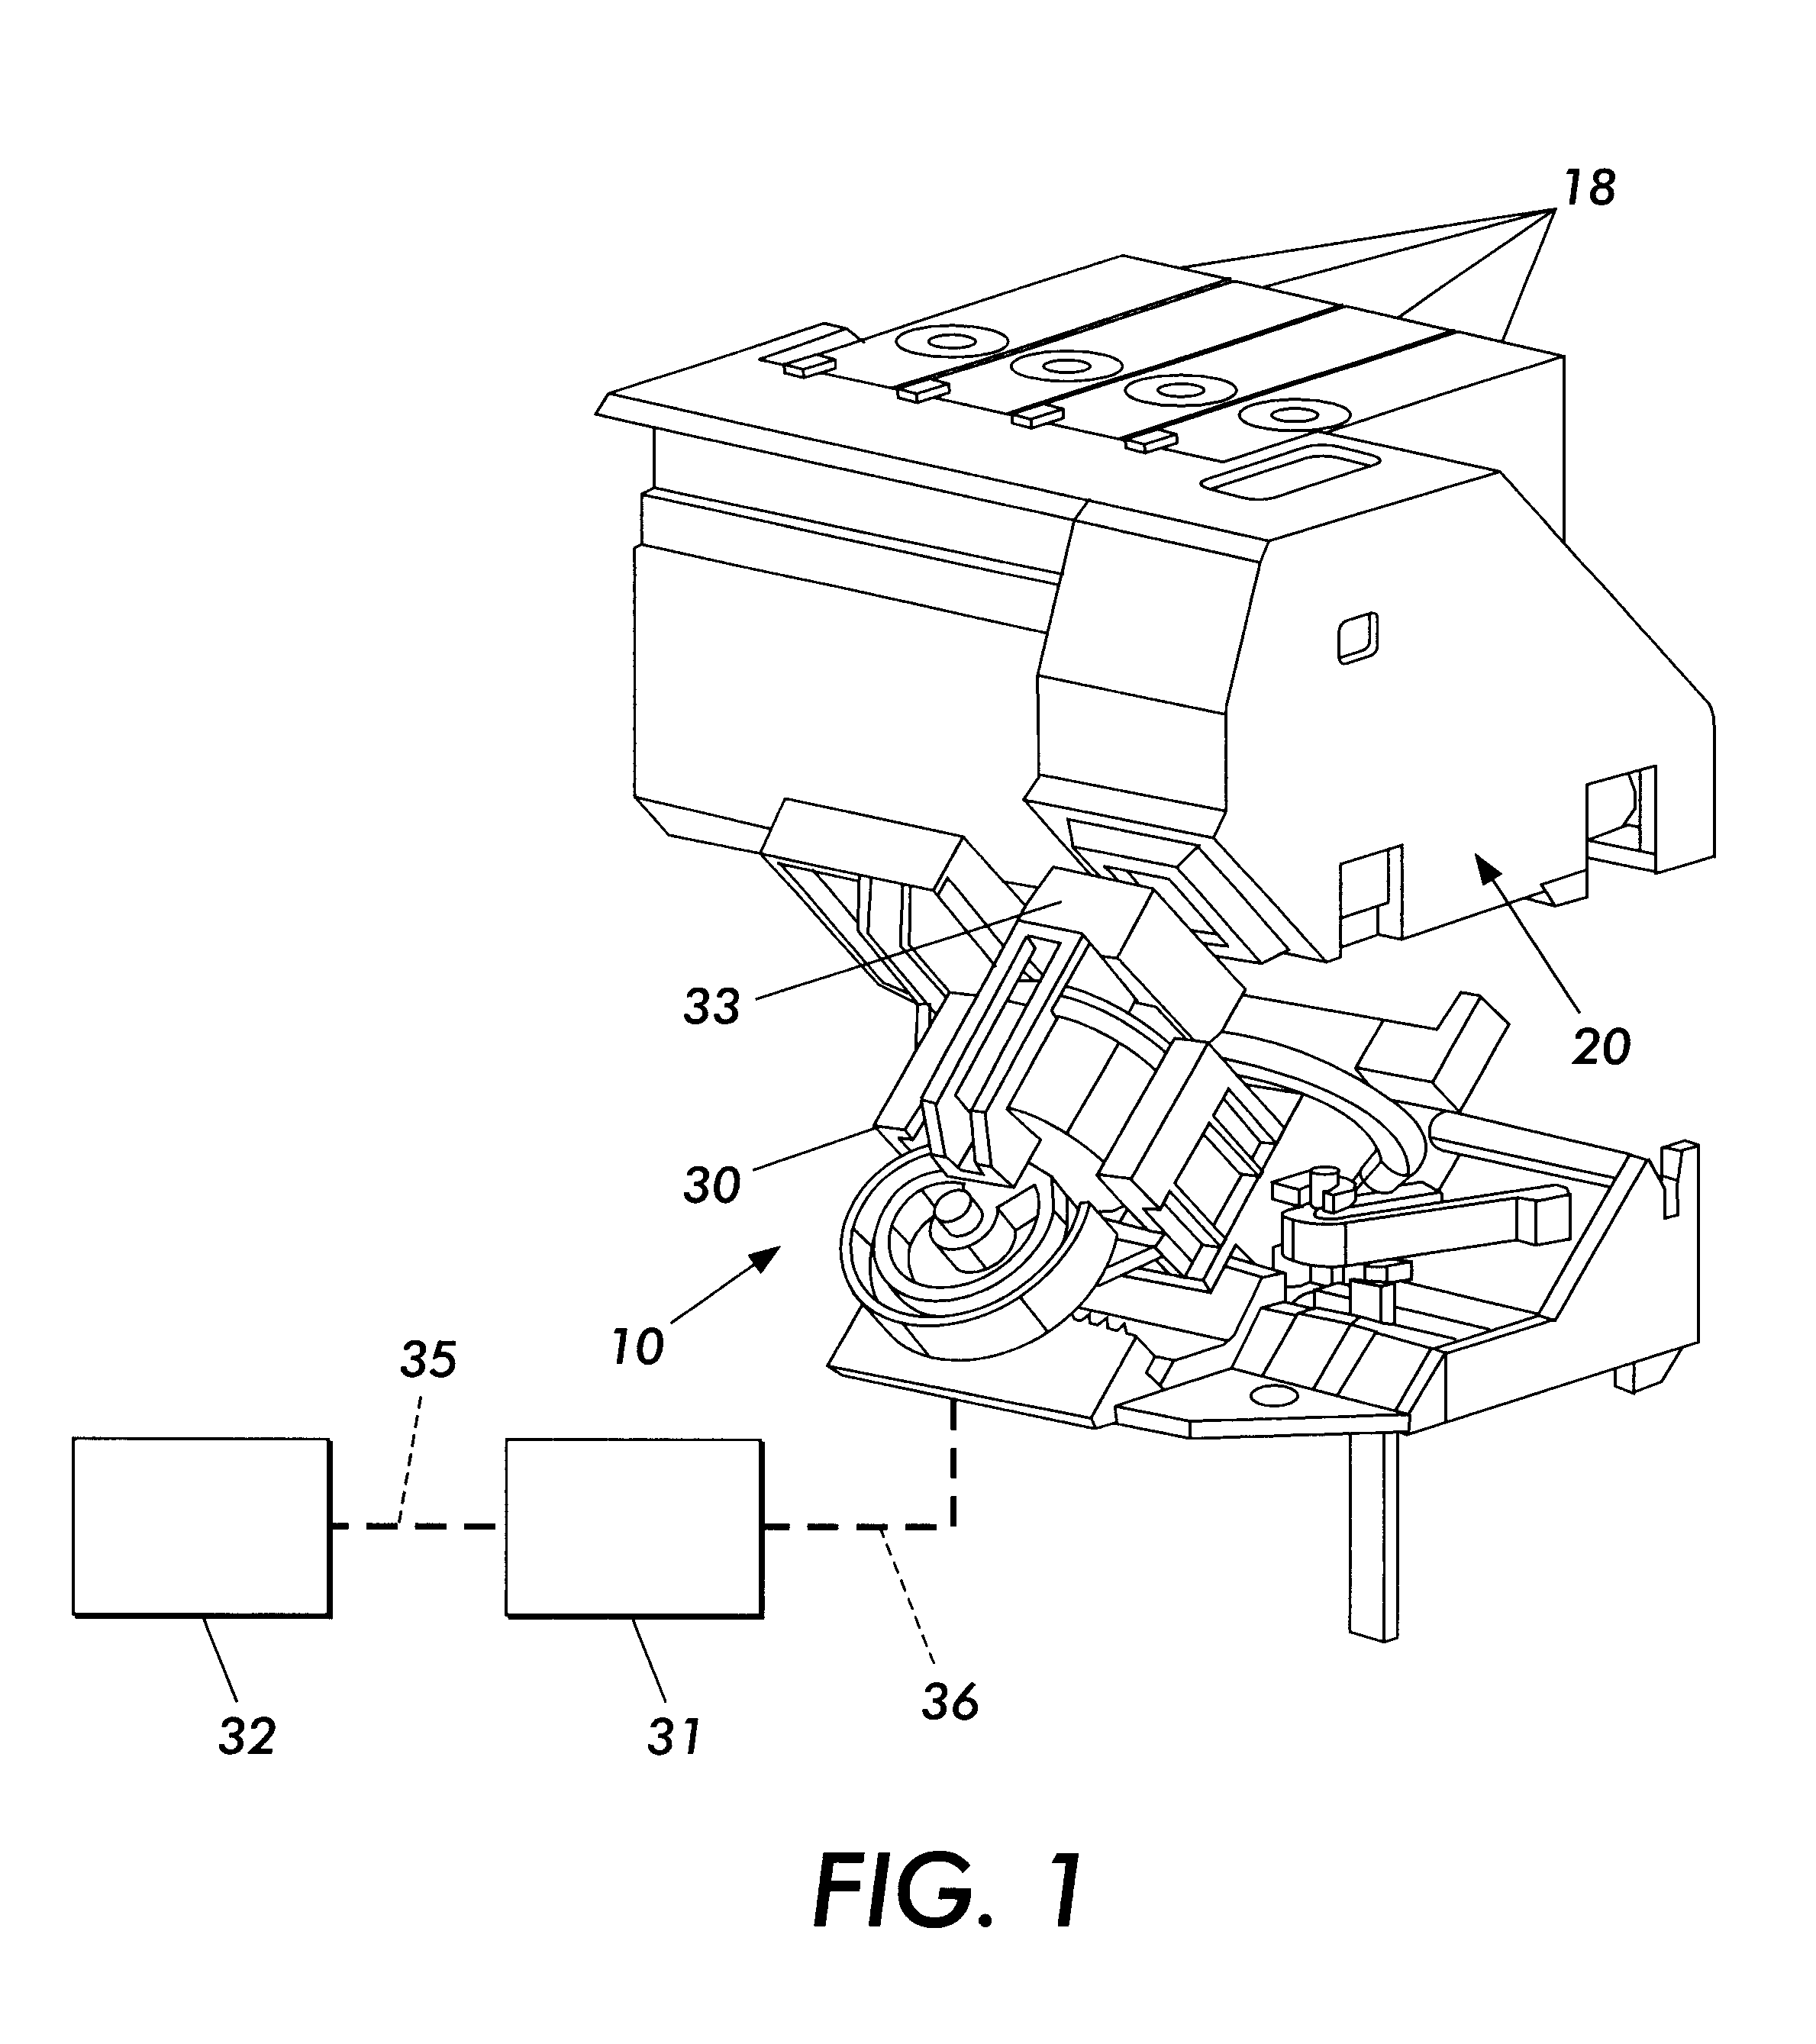 Method and apparatus for cleaning fluid ejection cartridge and maintenance station